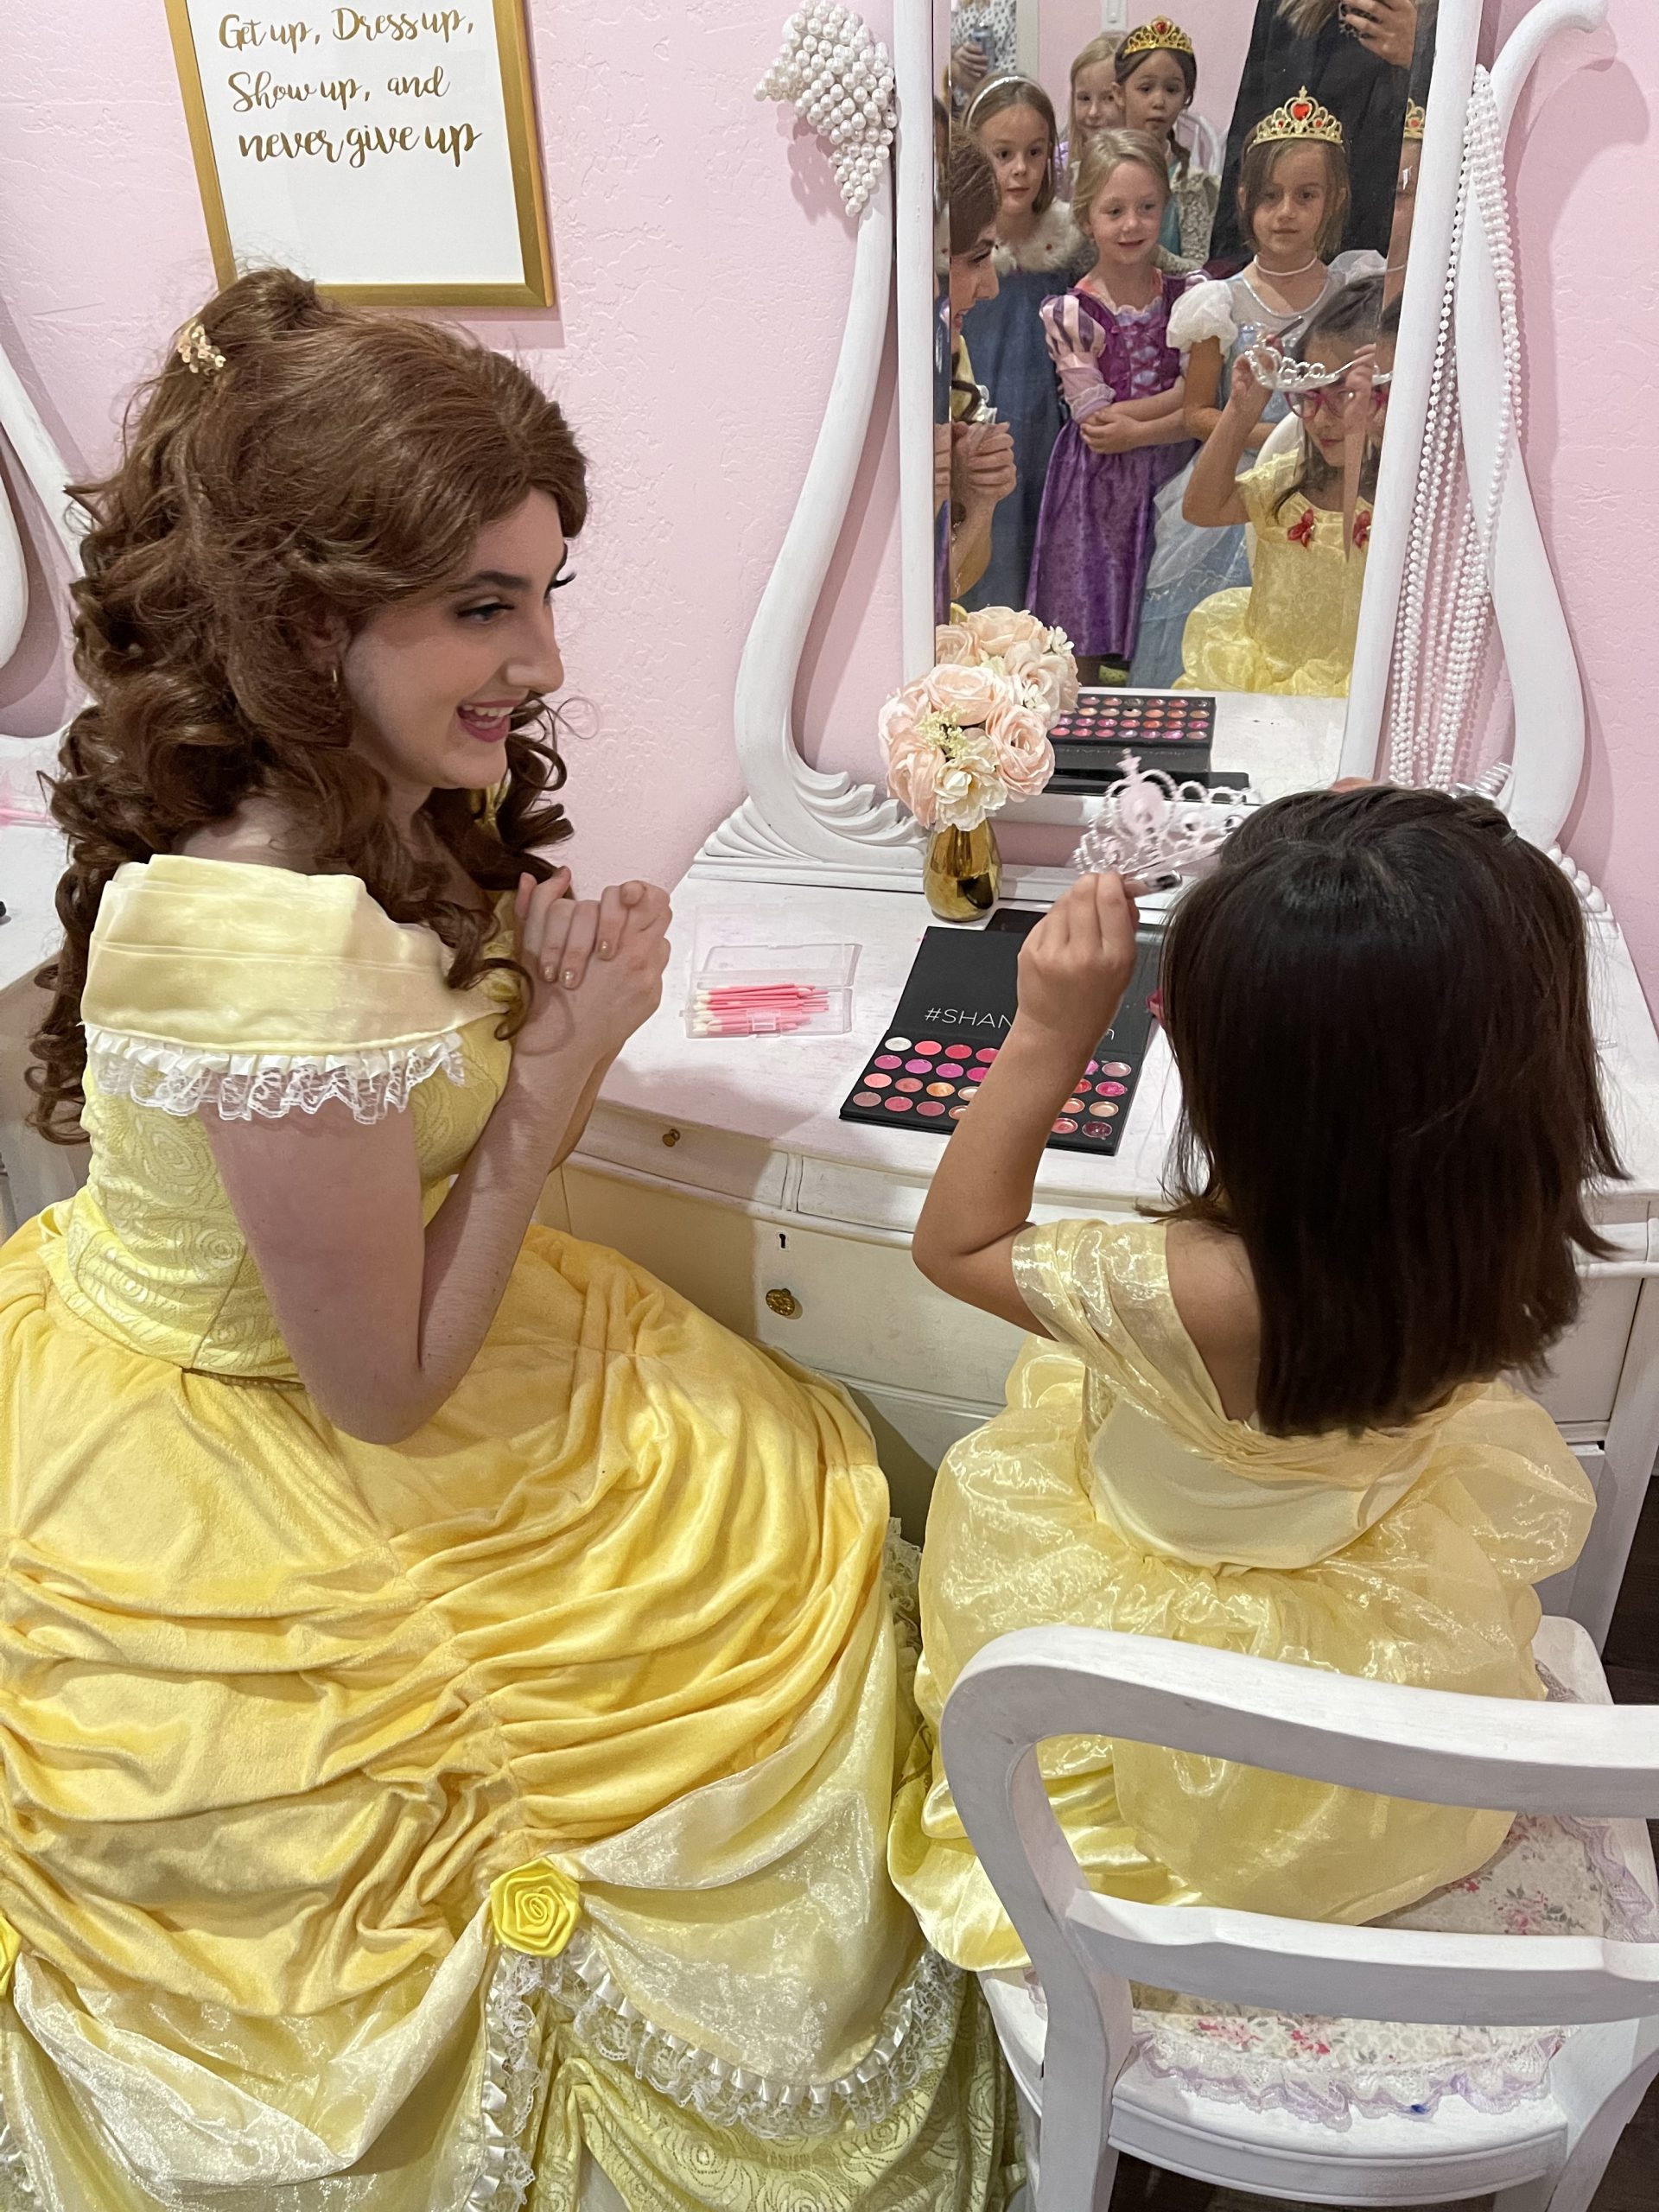 Belle and little girl dressed as Belle sitting in front of a makeup table with the reflections of other little girls dressed a princesses in the mirror.